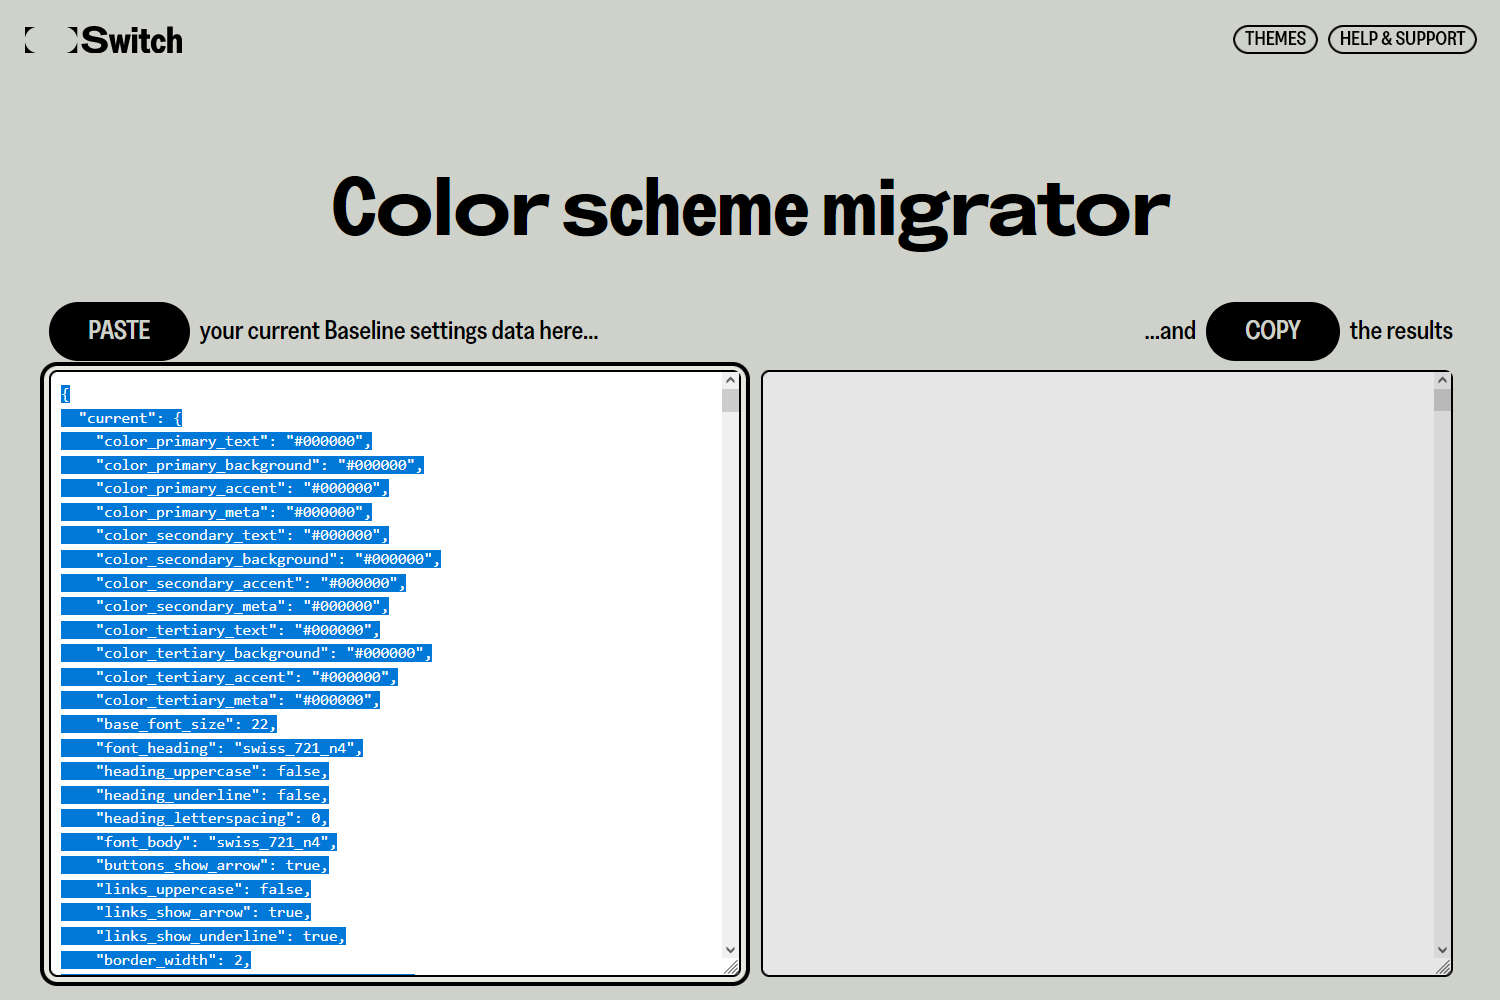 The Color scheme migrator web page with the Paste option selected.